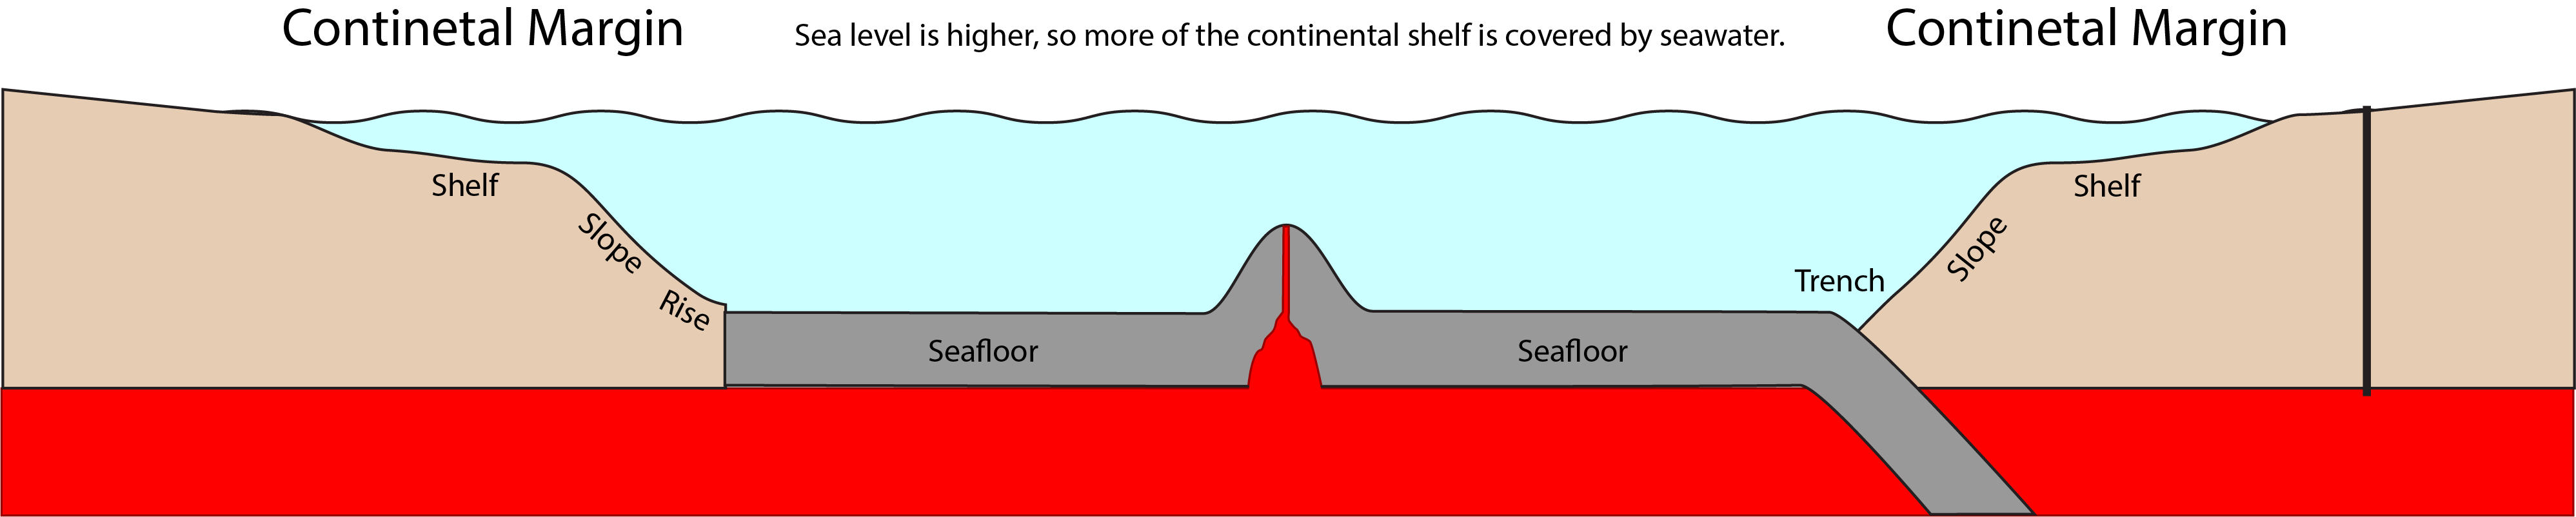 Profile extending from the continental margin (left), dropping off to the deep sea floor, where there is a spreading center in the middle.  The abyssal plain continues to the left before subducting beneath another continental plate on the right.  Sea level is higher, so more of the continental shelf if covered by seawater.